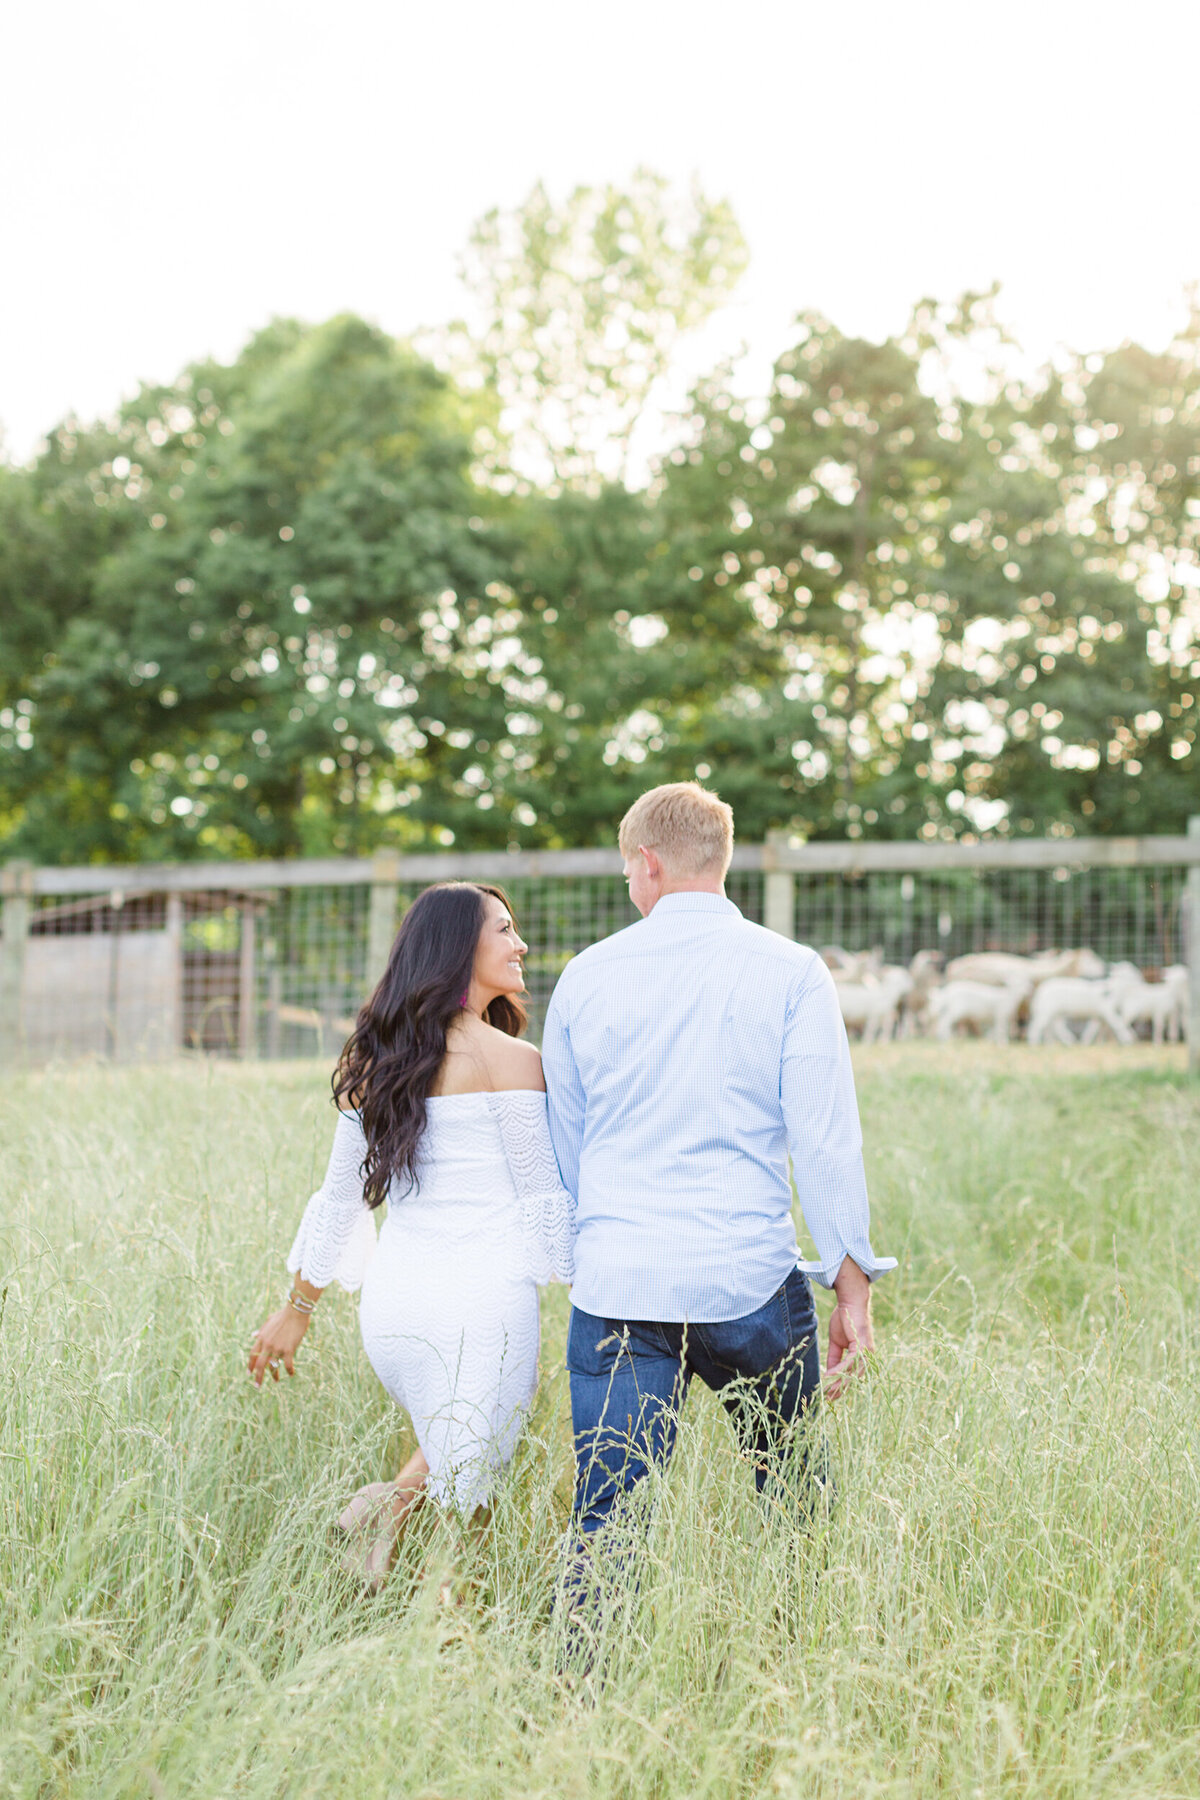 Cor Photography- Kelsie + Taylor Rehearsal dinner- field of sheep